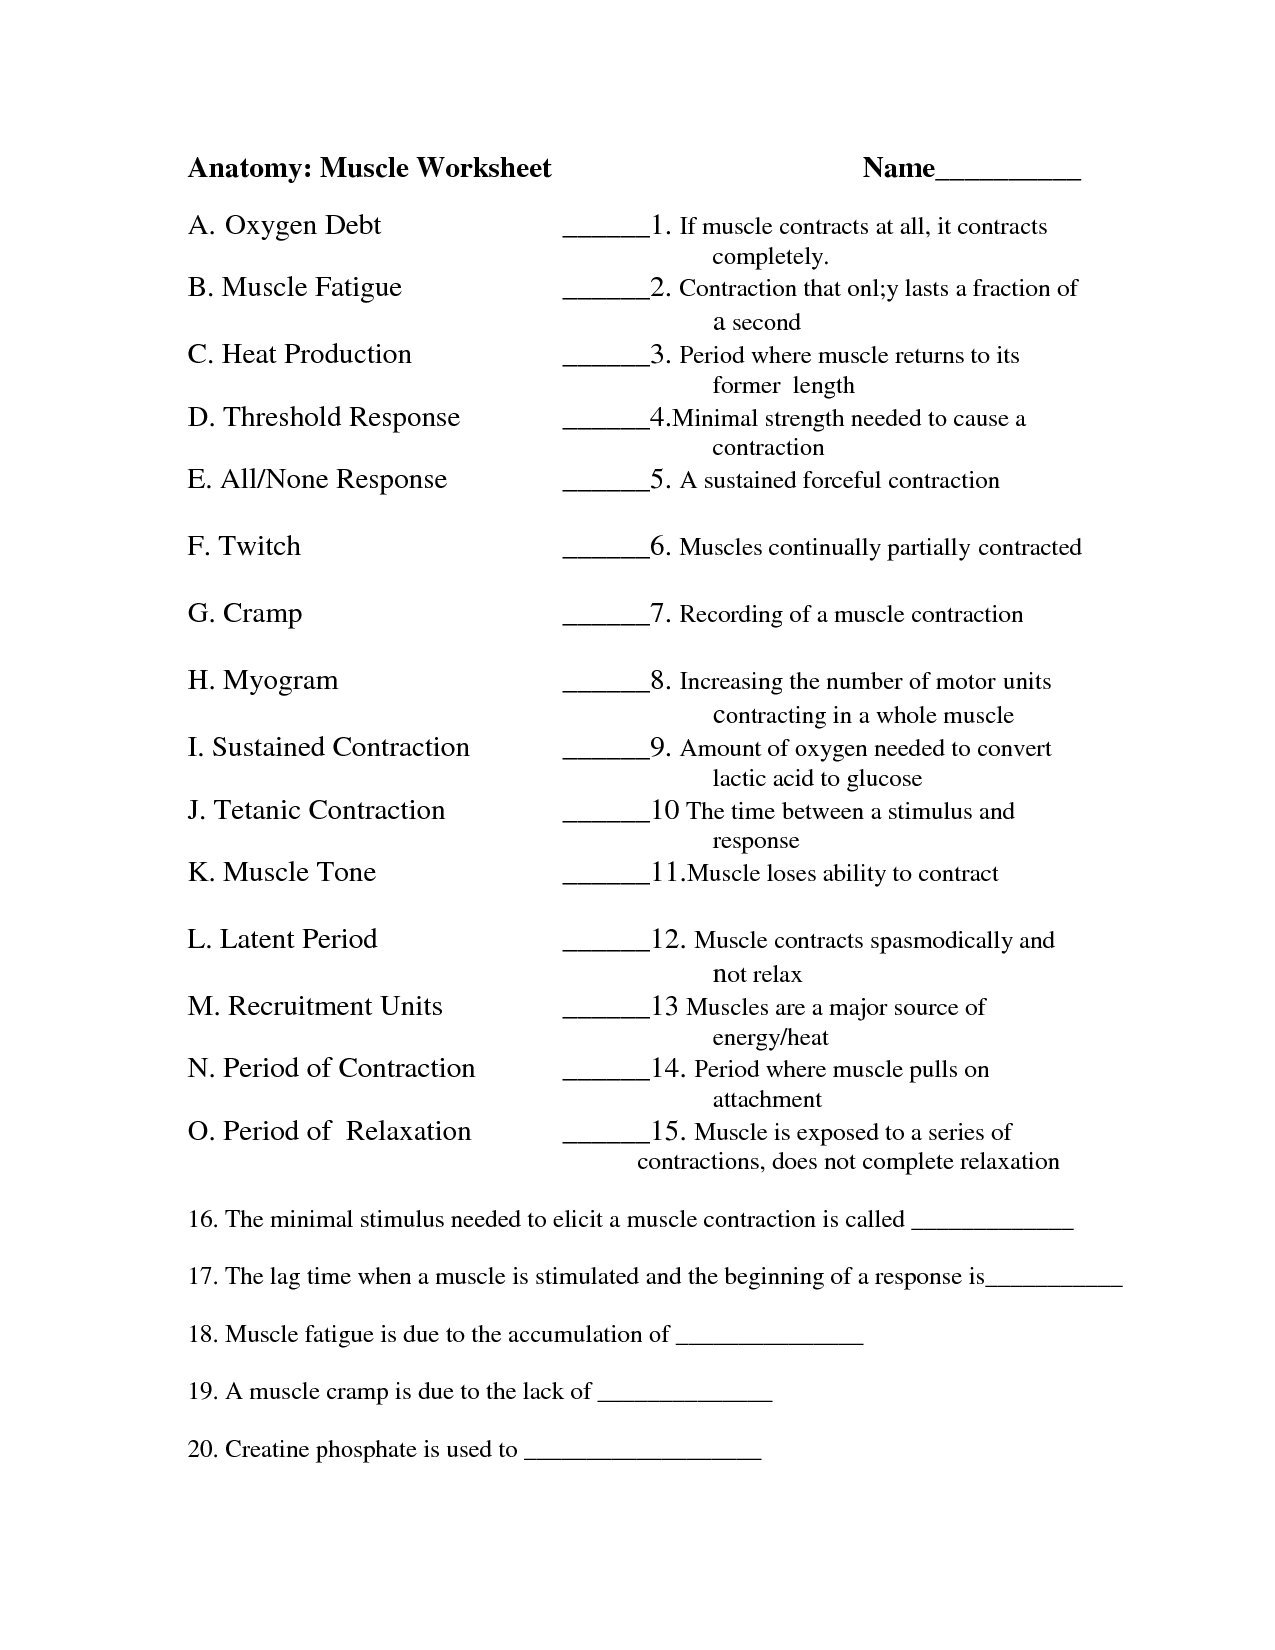 Anatomy And Physiology Muscle Worksheets | Body Muscles | Human | Anatomy And Physiology Printable Worksheets